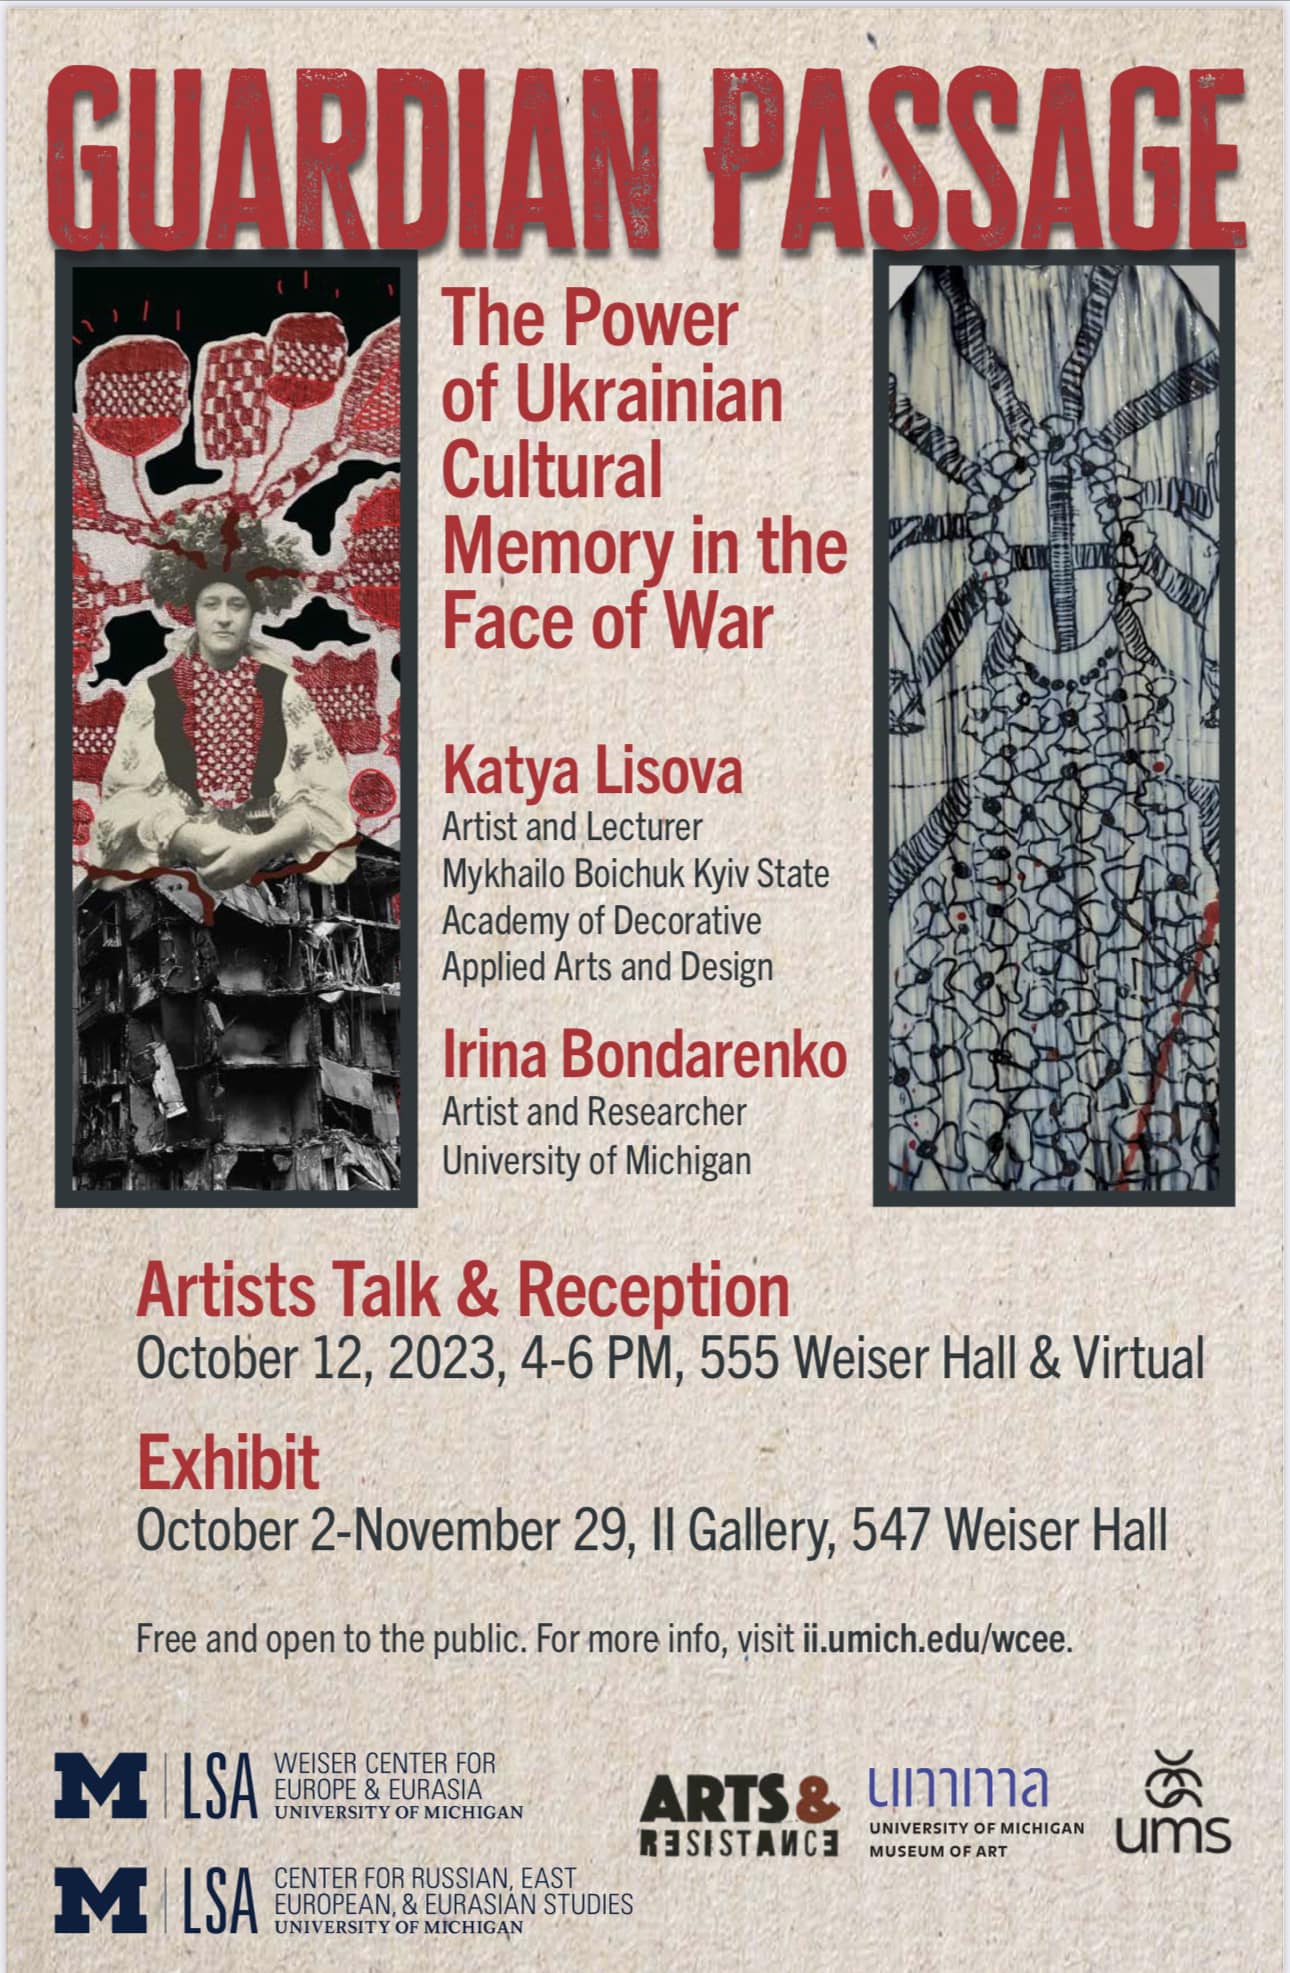 Exhibit "The Power of Ukrainian Cultural Memory in the Face of War"